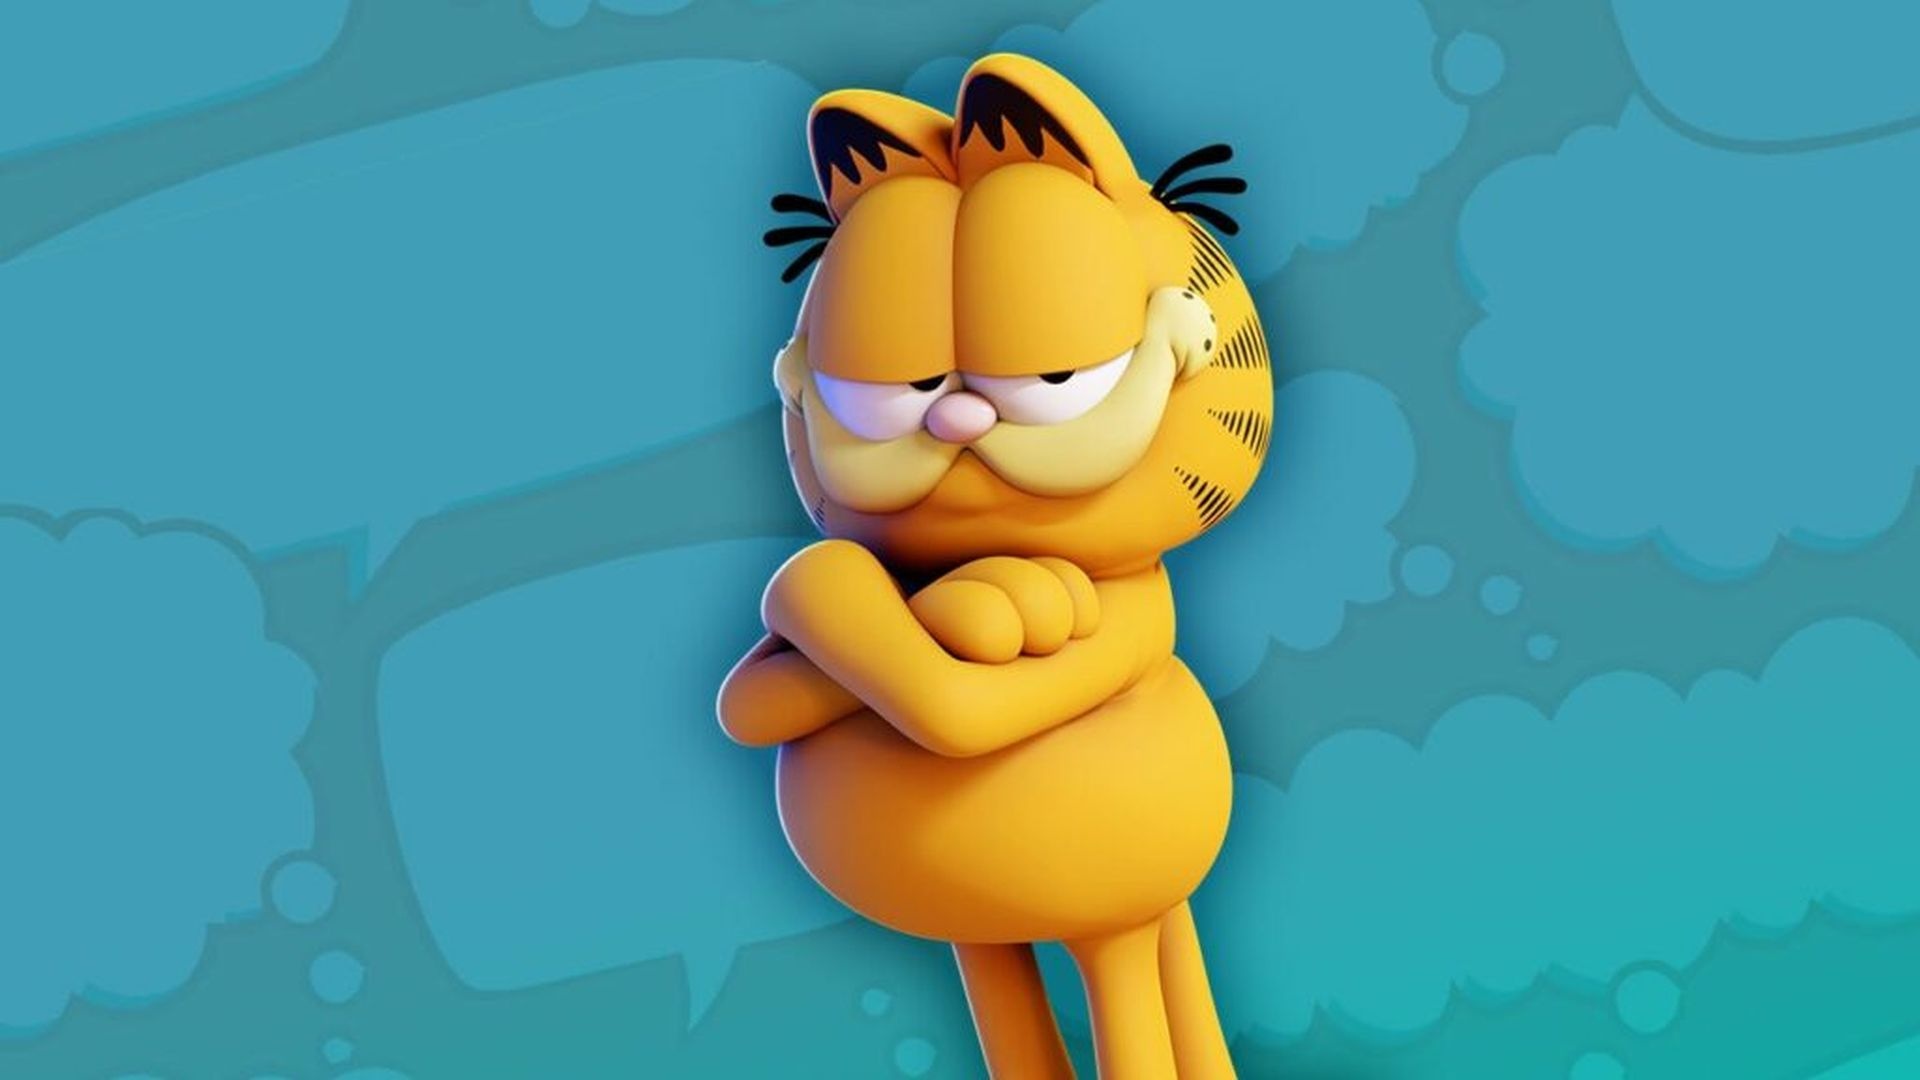 Garfield: Garfield's personality is as recognizable as his appearance, which has changed considerably over the years. 1920x1080 Full HD Background.